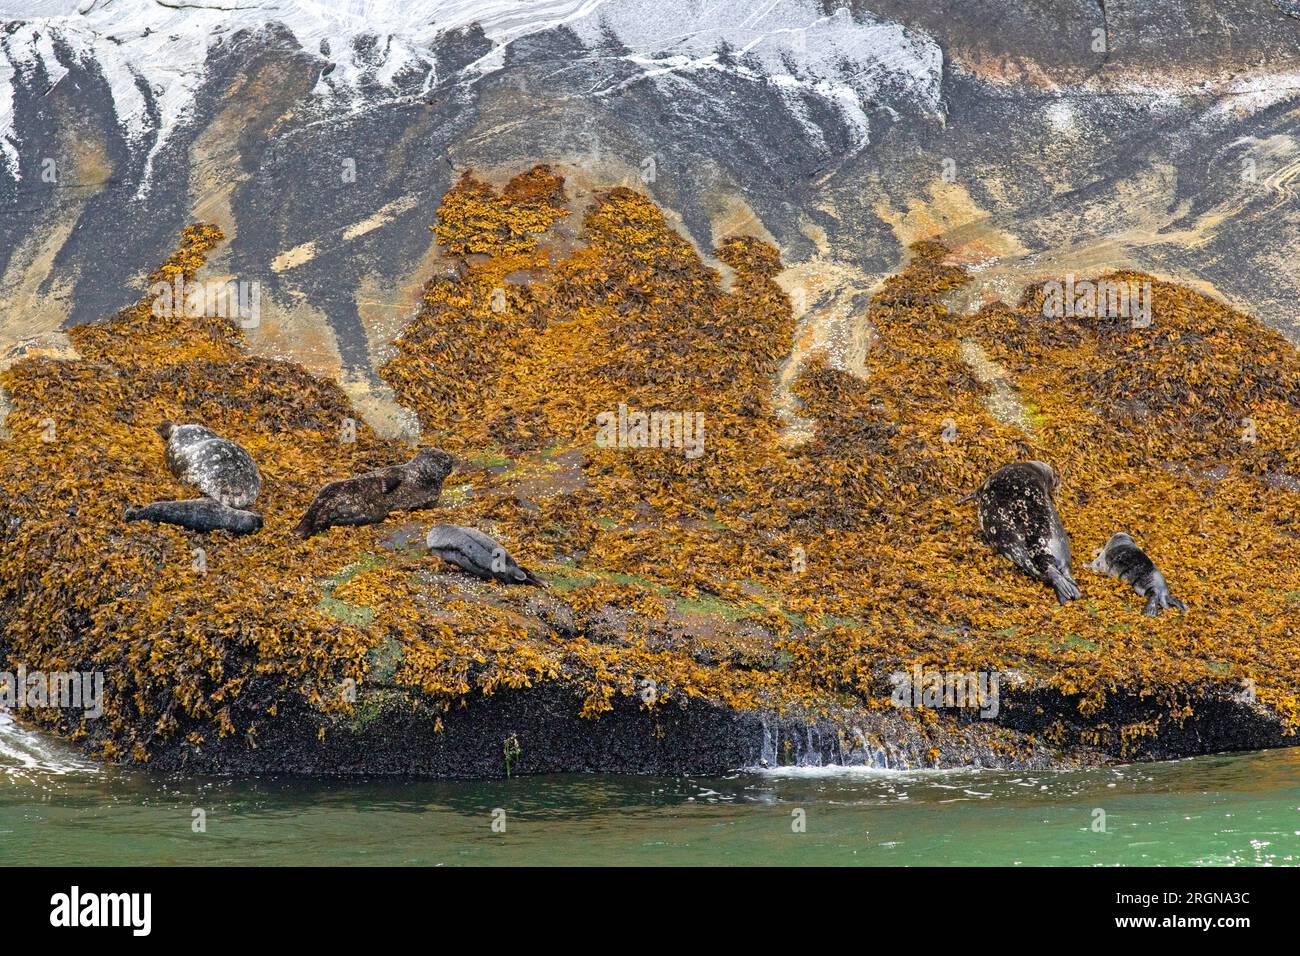 Harbour seals in Rudyerd Bay, Misty Fjords National Monument Stock Photo